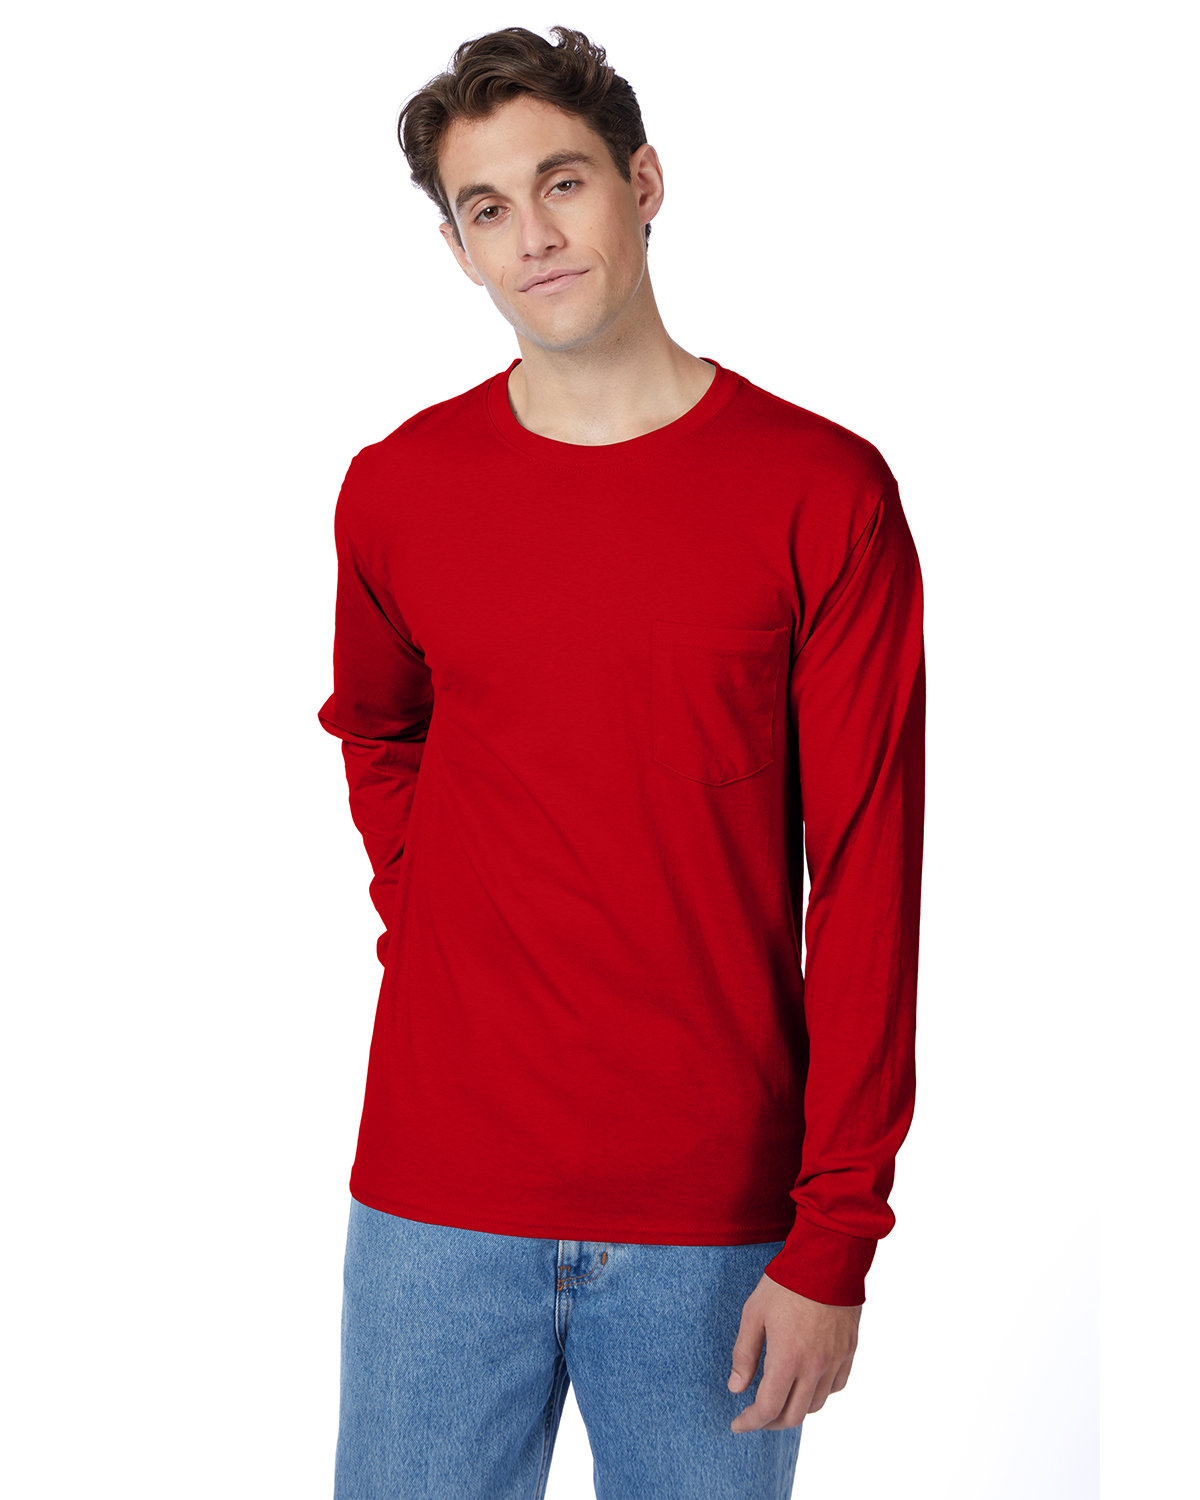 Hanes Men's Authentic-T Long-Sleeve Pocket T-Shirt DEEP RED 